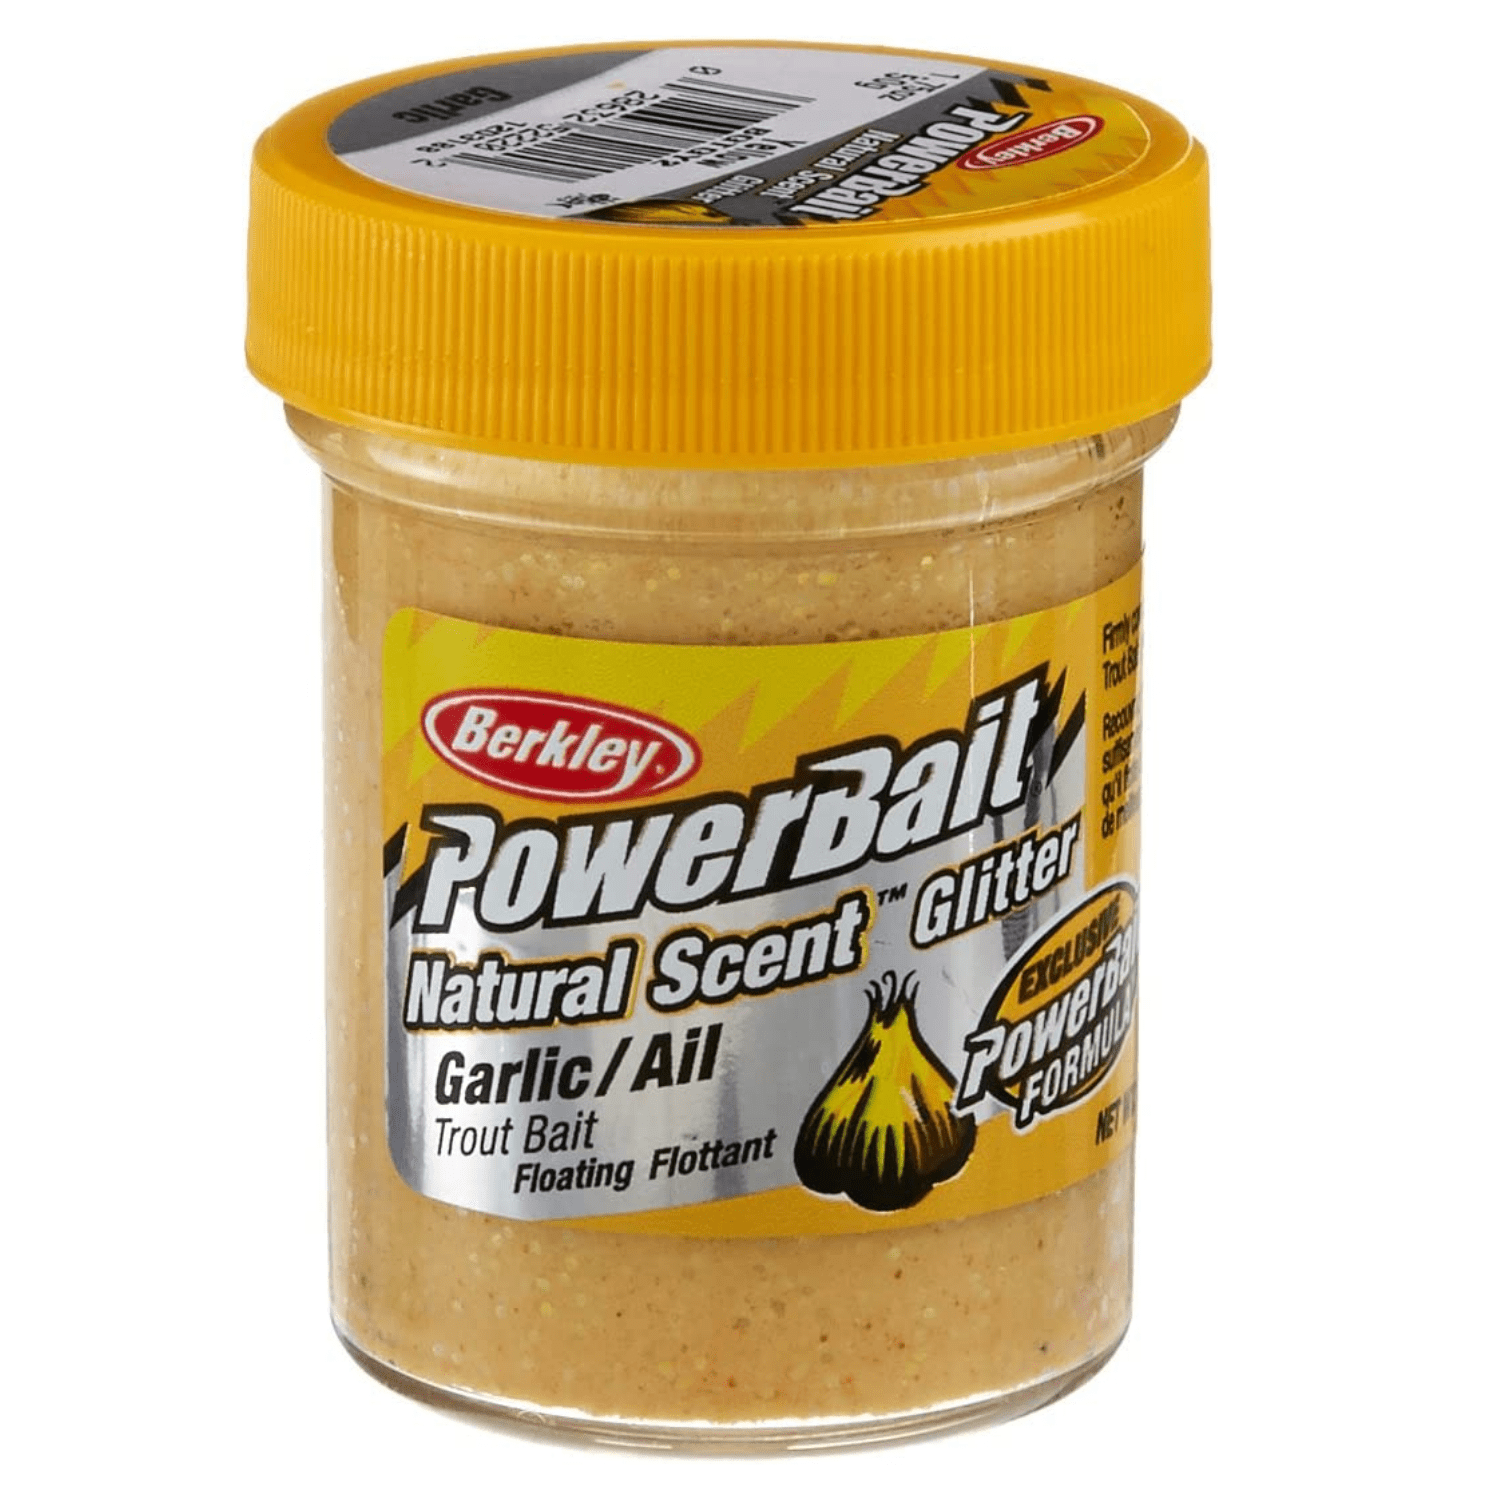 PowerBait Natural Glitter Trout Dough Fishing Bait Garlic/Ail, 1.8 oz  Moldable & Easy to Use Infused with Glitter to Reflect Light & Increase